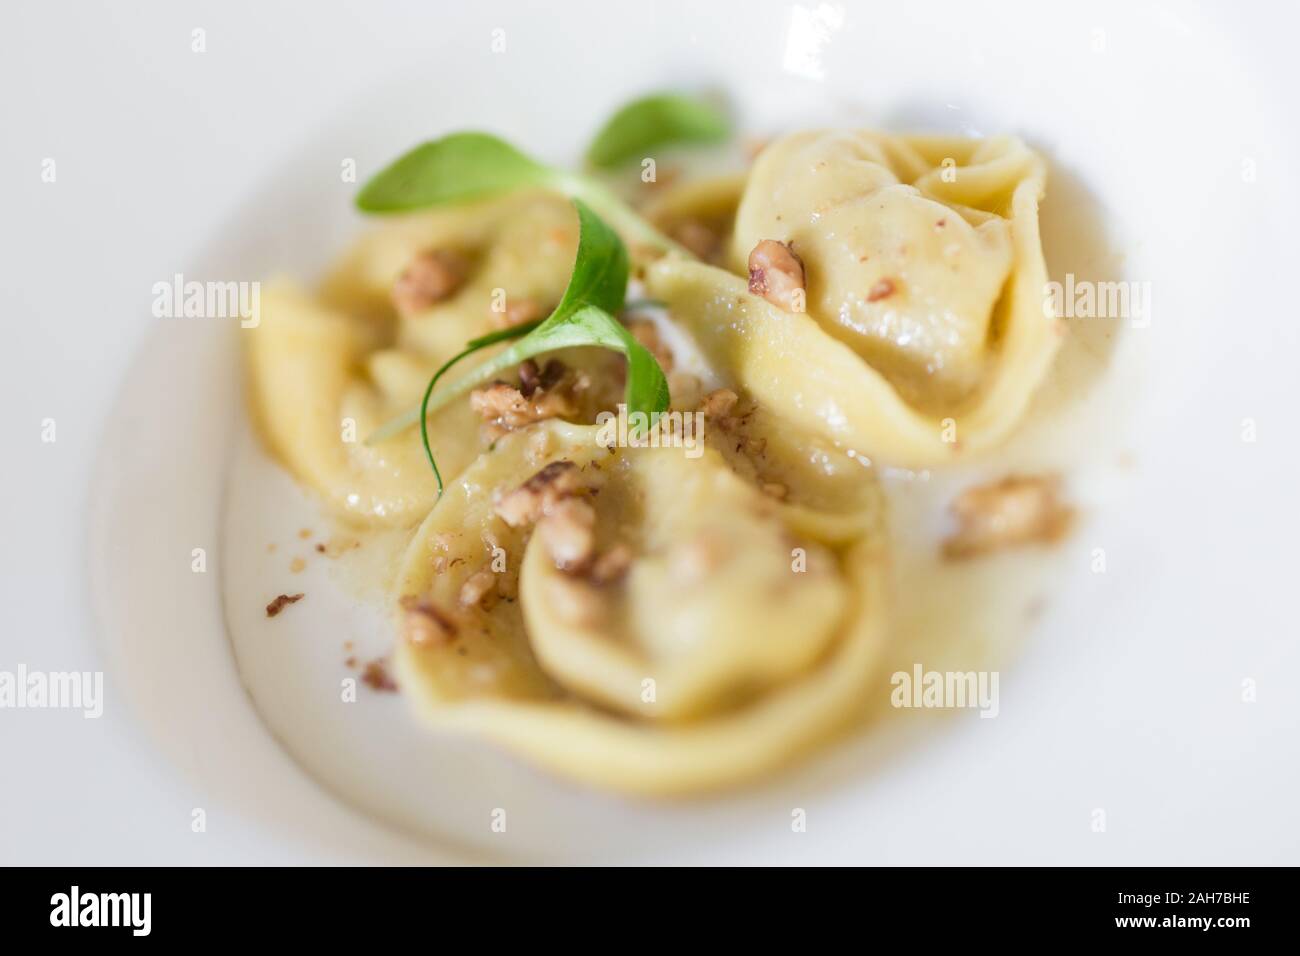 Close up of a dish cotaining three Tortellini with a chestnut and salad topping Stock Photo